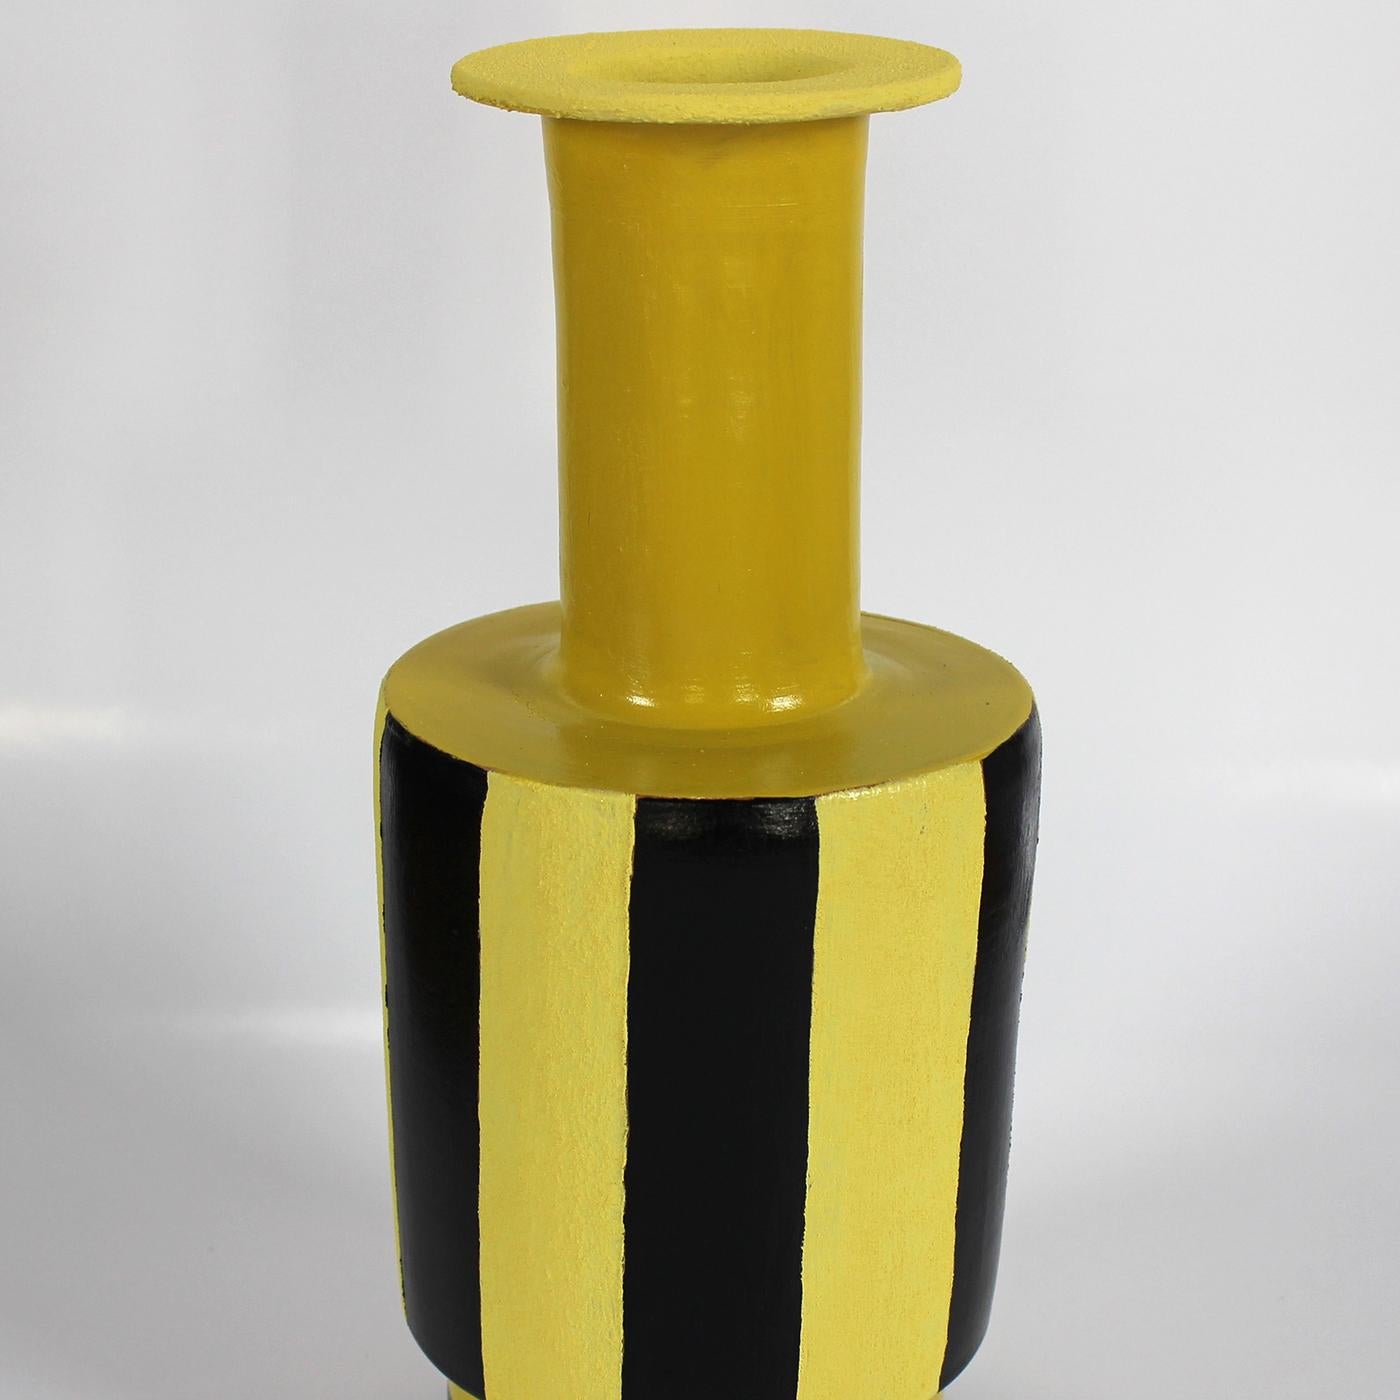 This eye-catching vase by Italian designer Mascia Meccani is crafted from red terracotta. Hand painted using a mixture of artisanal techniques in statement yellow and black tones, the design is distinguished by a robust silhouette with a tall neck